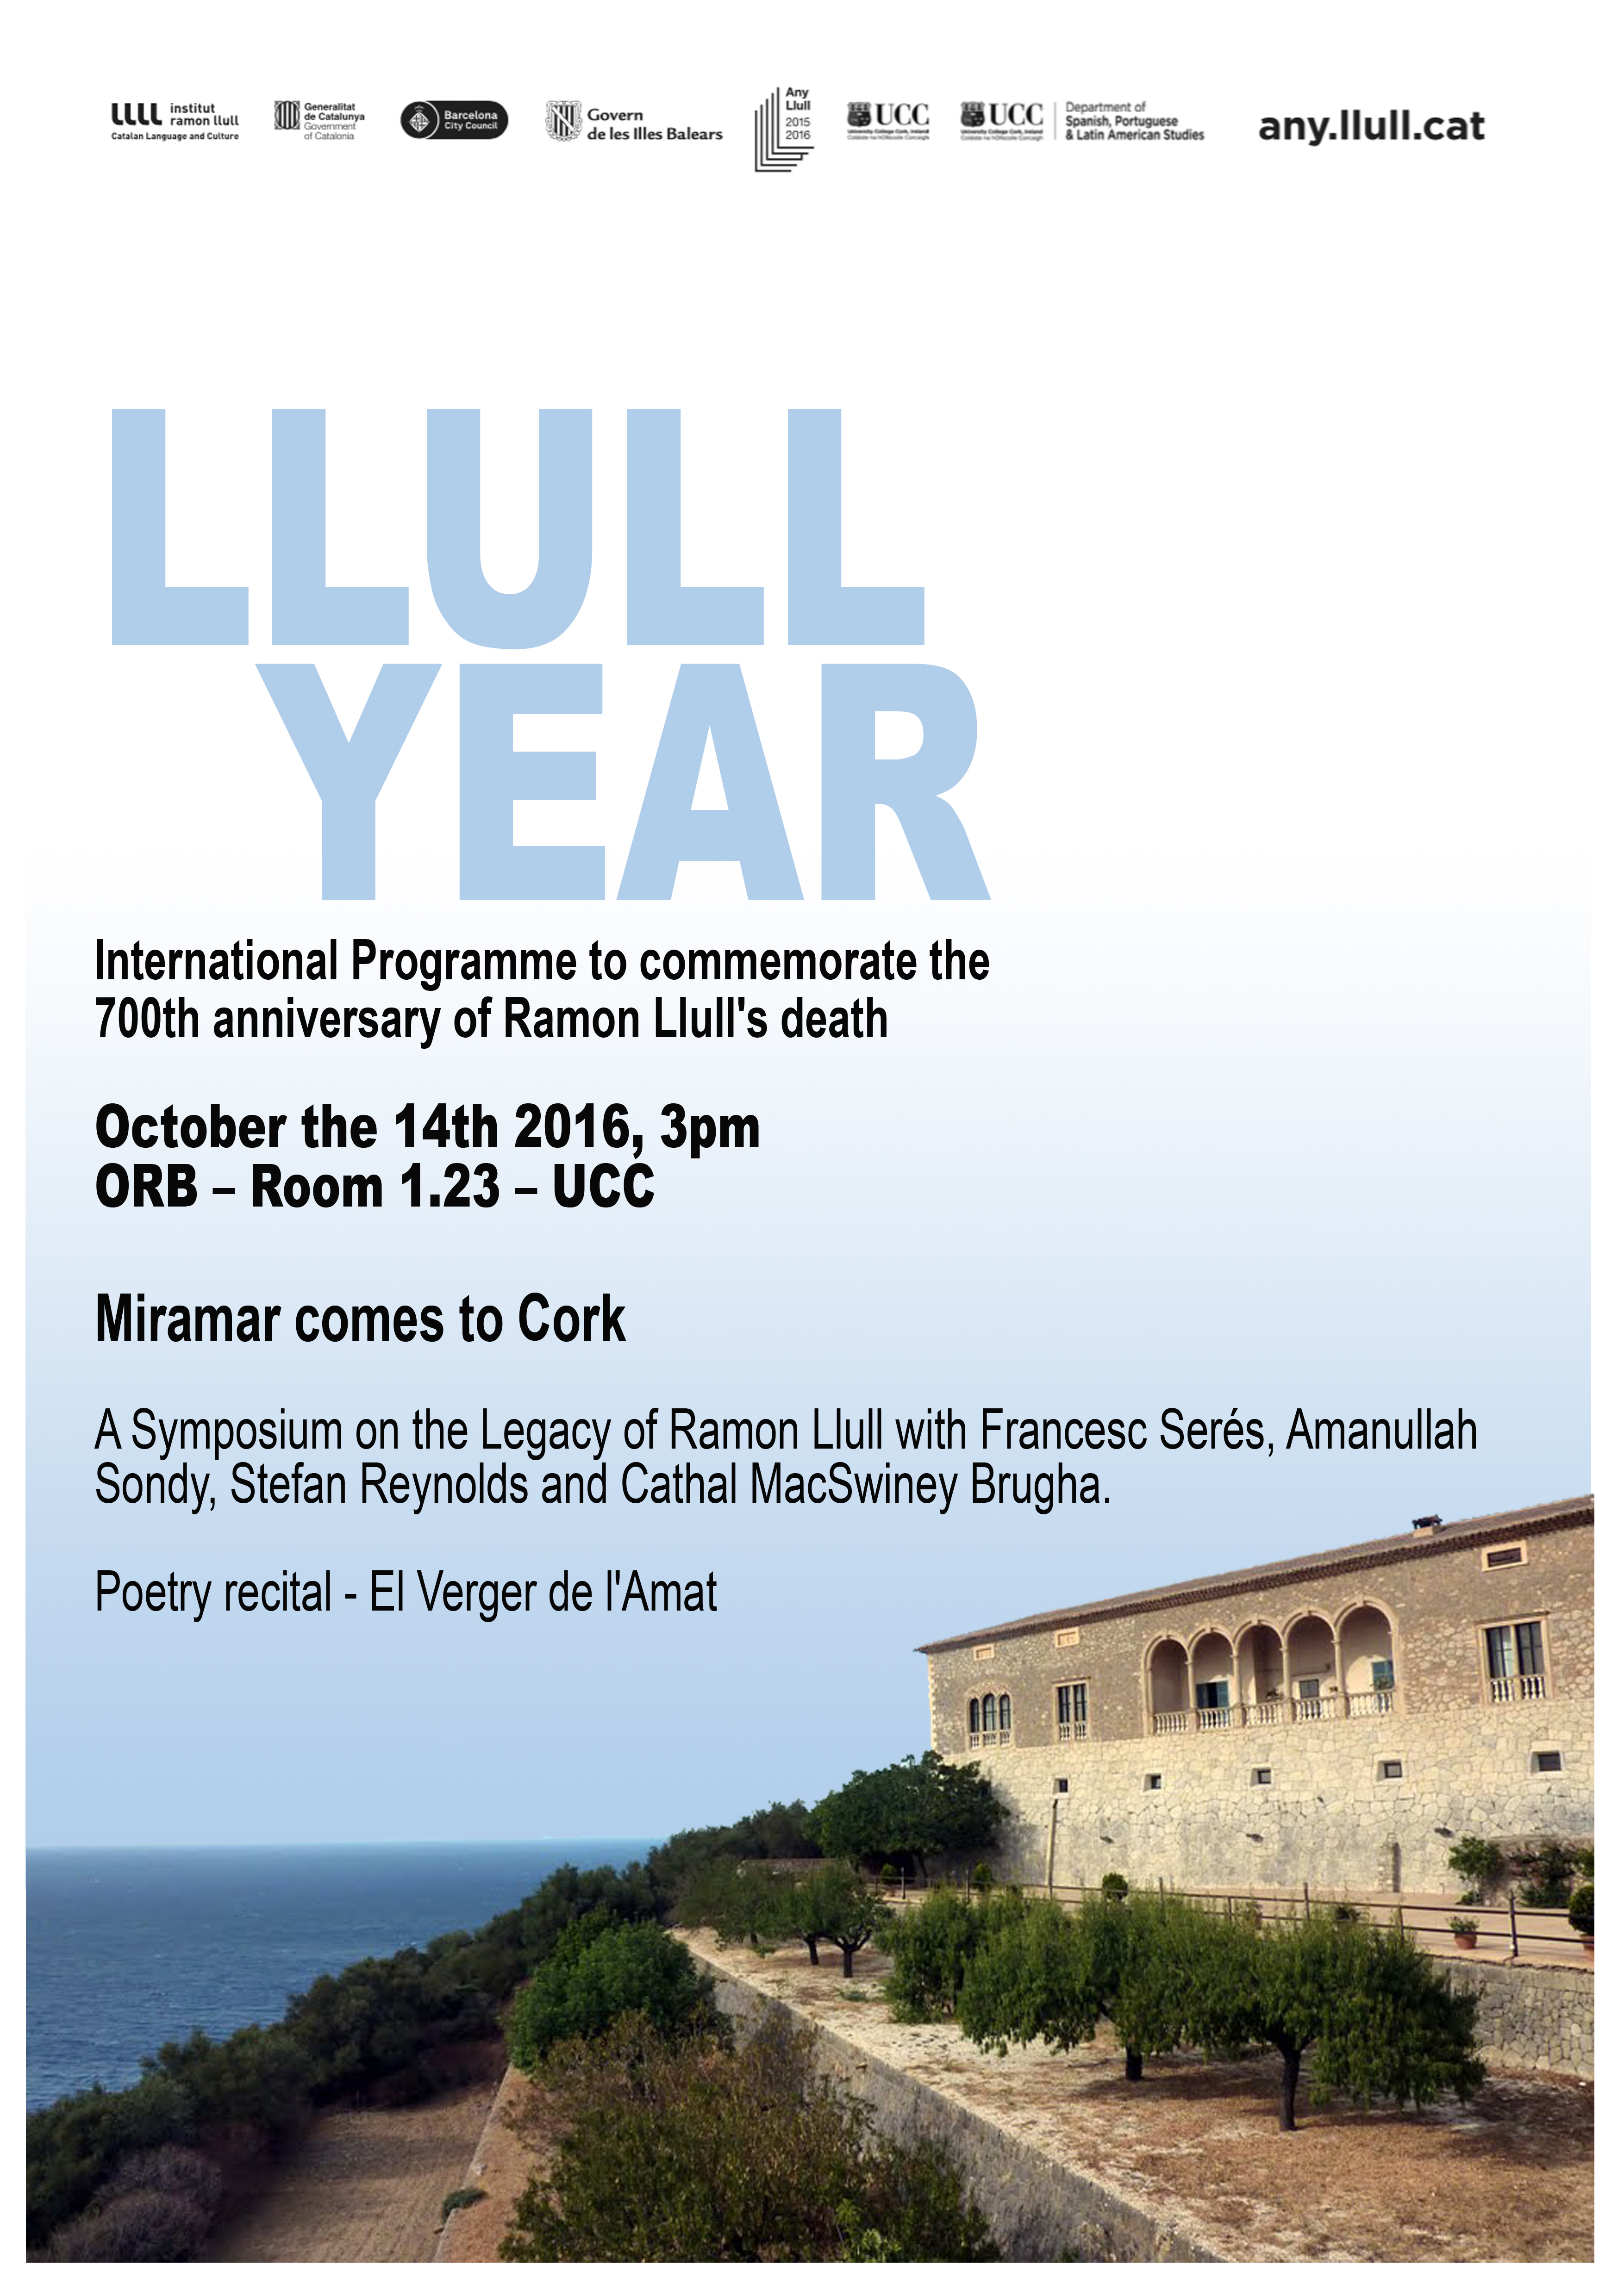 Miramar comes to Cork: A Symposium on the Legacy of Ramon Llull